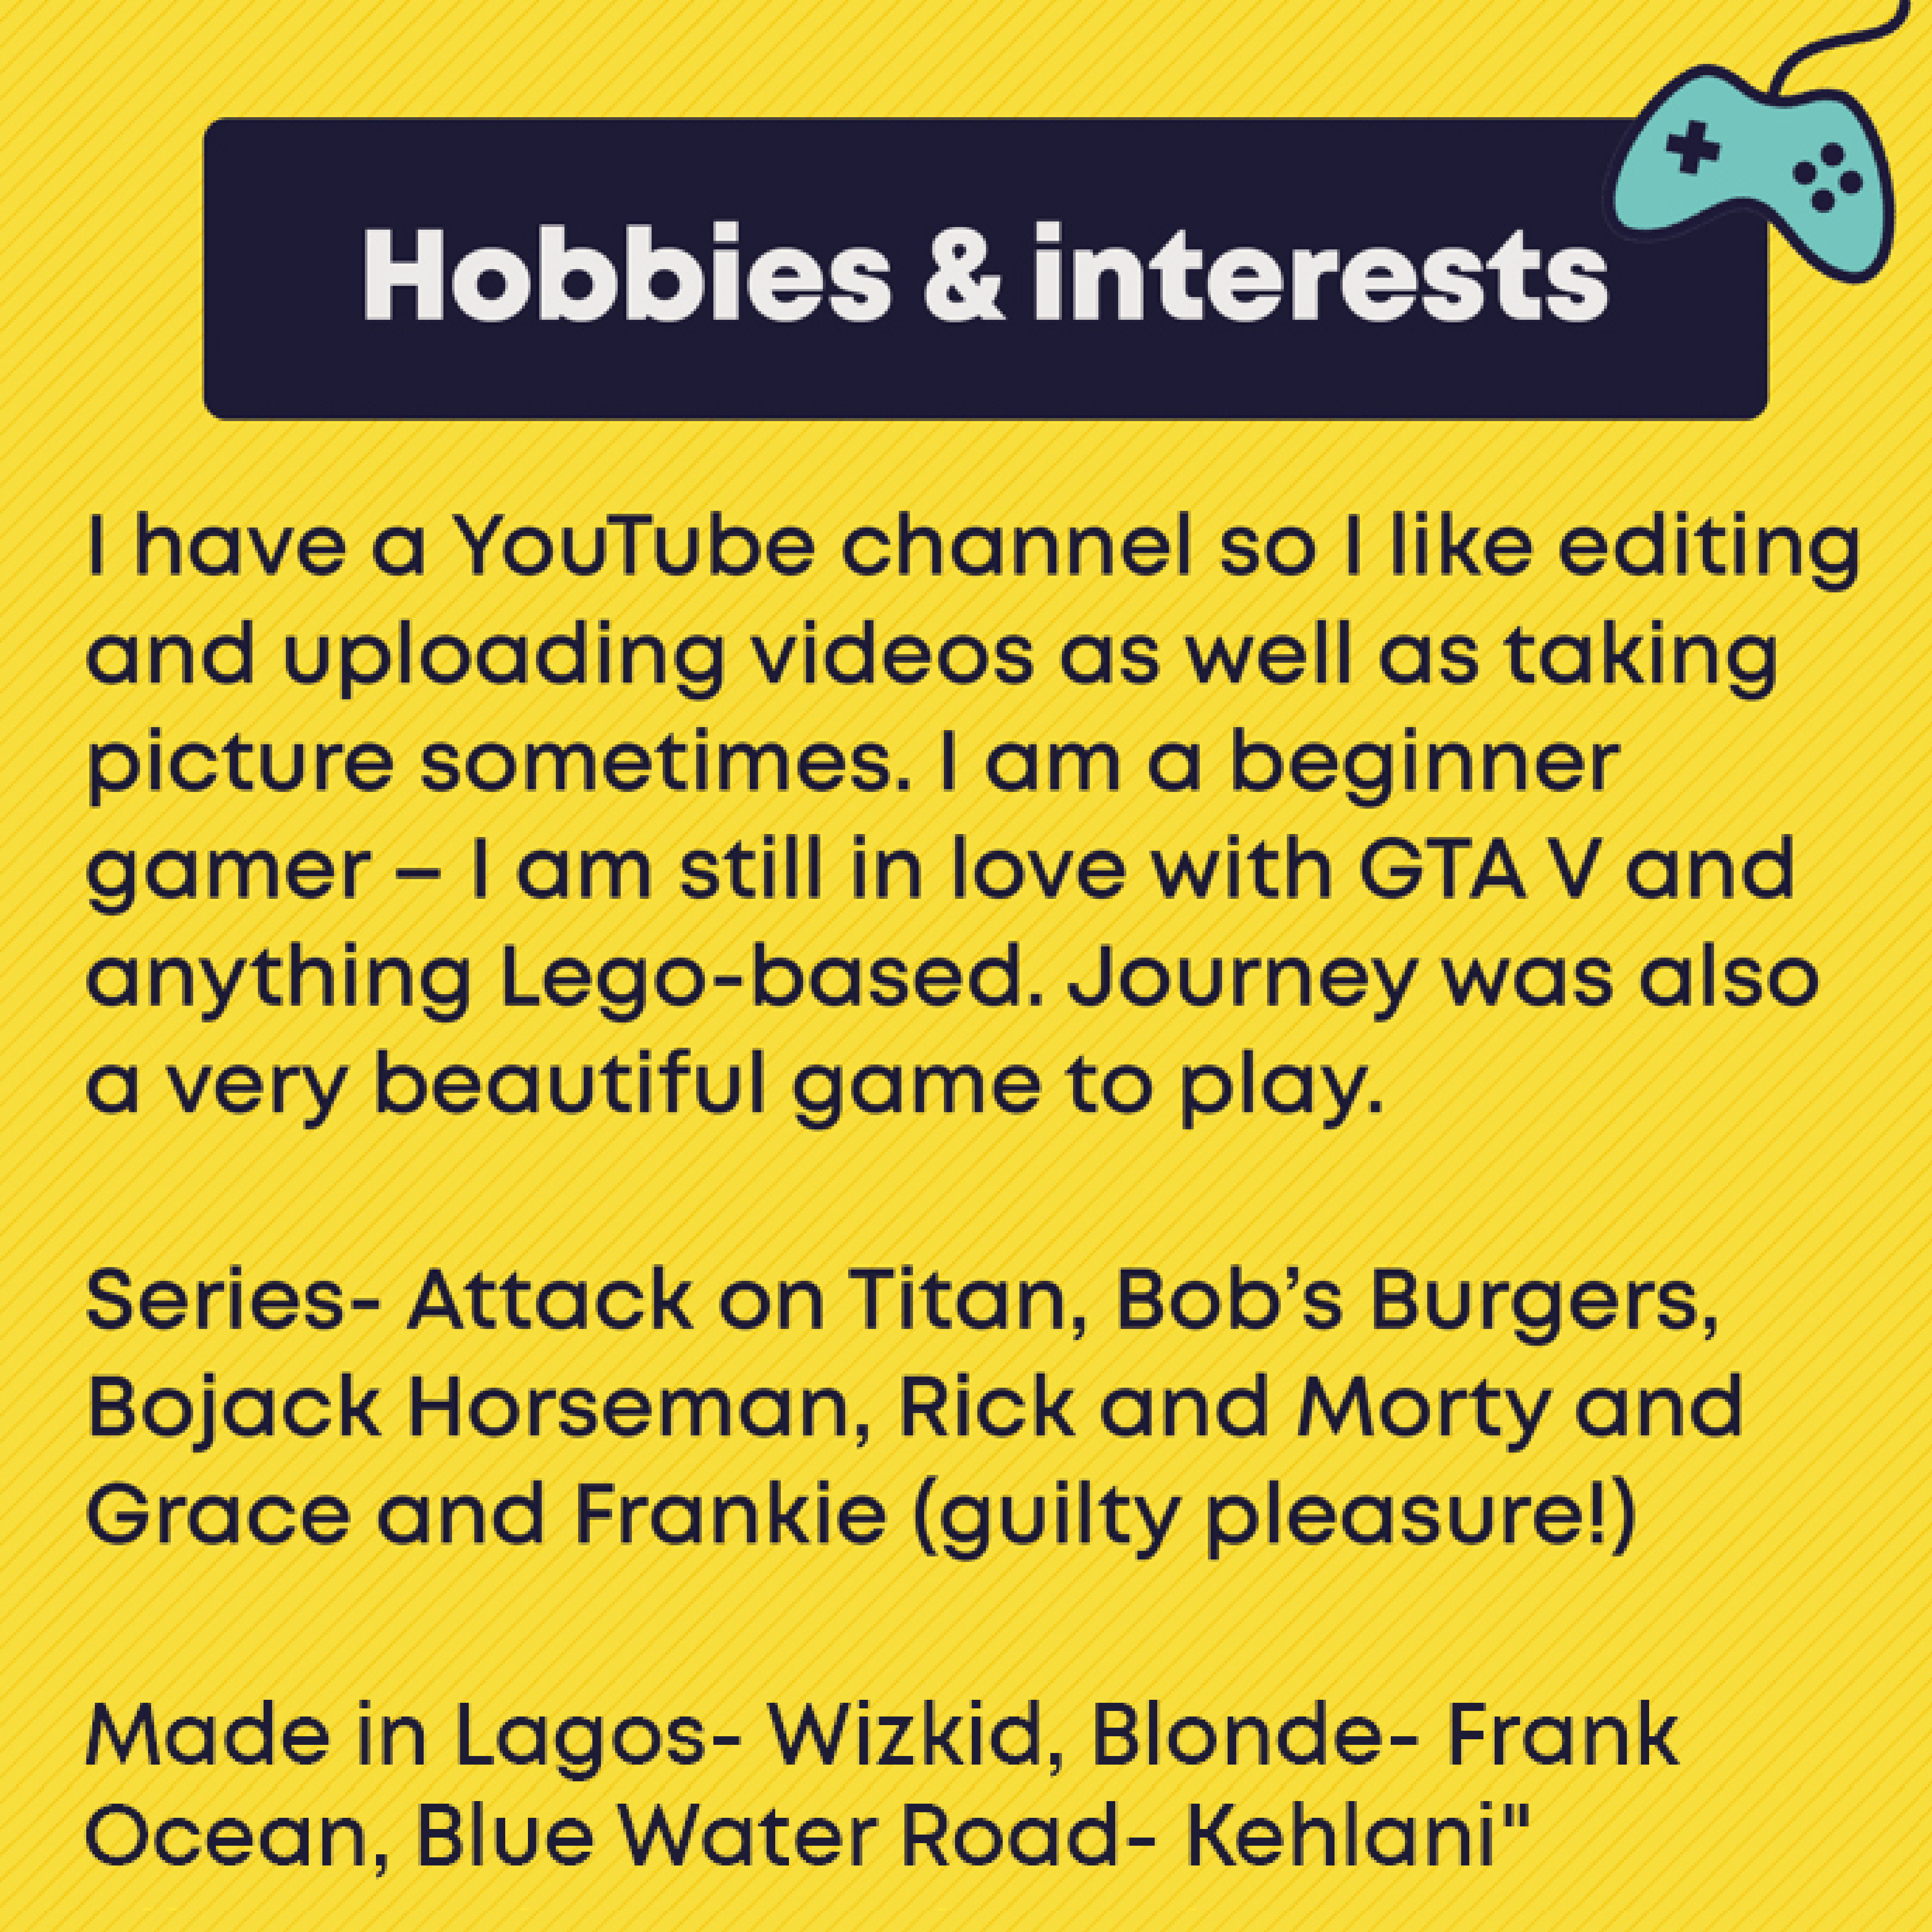 Hobbies & interests. I have a YouTube channel so I like editing and uploading videos as well as taking picture sometimes. I am a beginner gamer – I am still in love with GTA V and anything Lego-based. Journey was also a very beautiful game to play.  Series- Attack on Titan, Bob’s Burgers, Bojack Horseman, Rick and Morty and Grace and Frankie (guilty pleasure!)  albums- Made in Lagos- Wizkid, Blonde- Frank Ocean, Blue Water Road- Kehlani